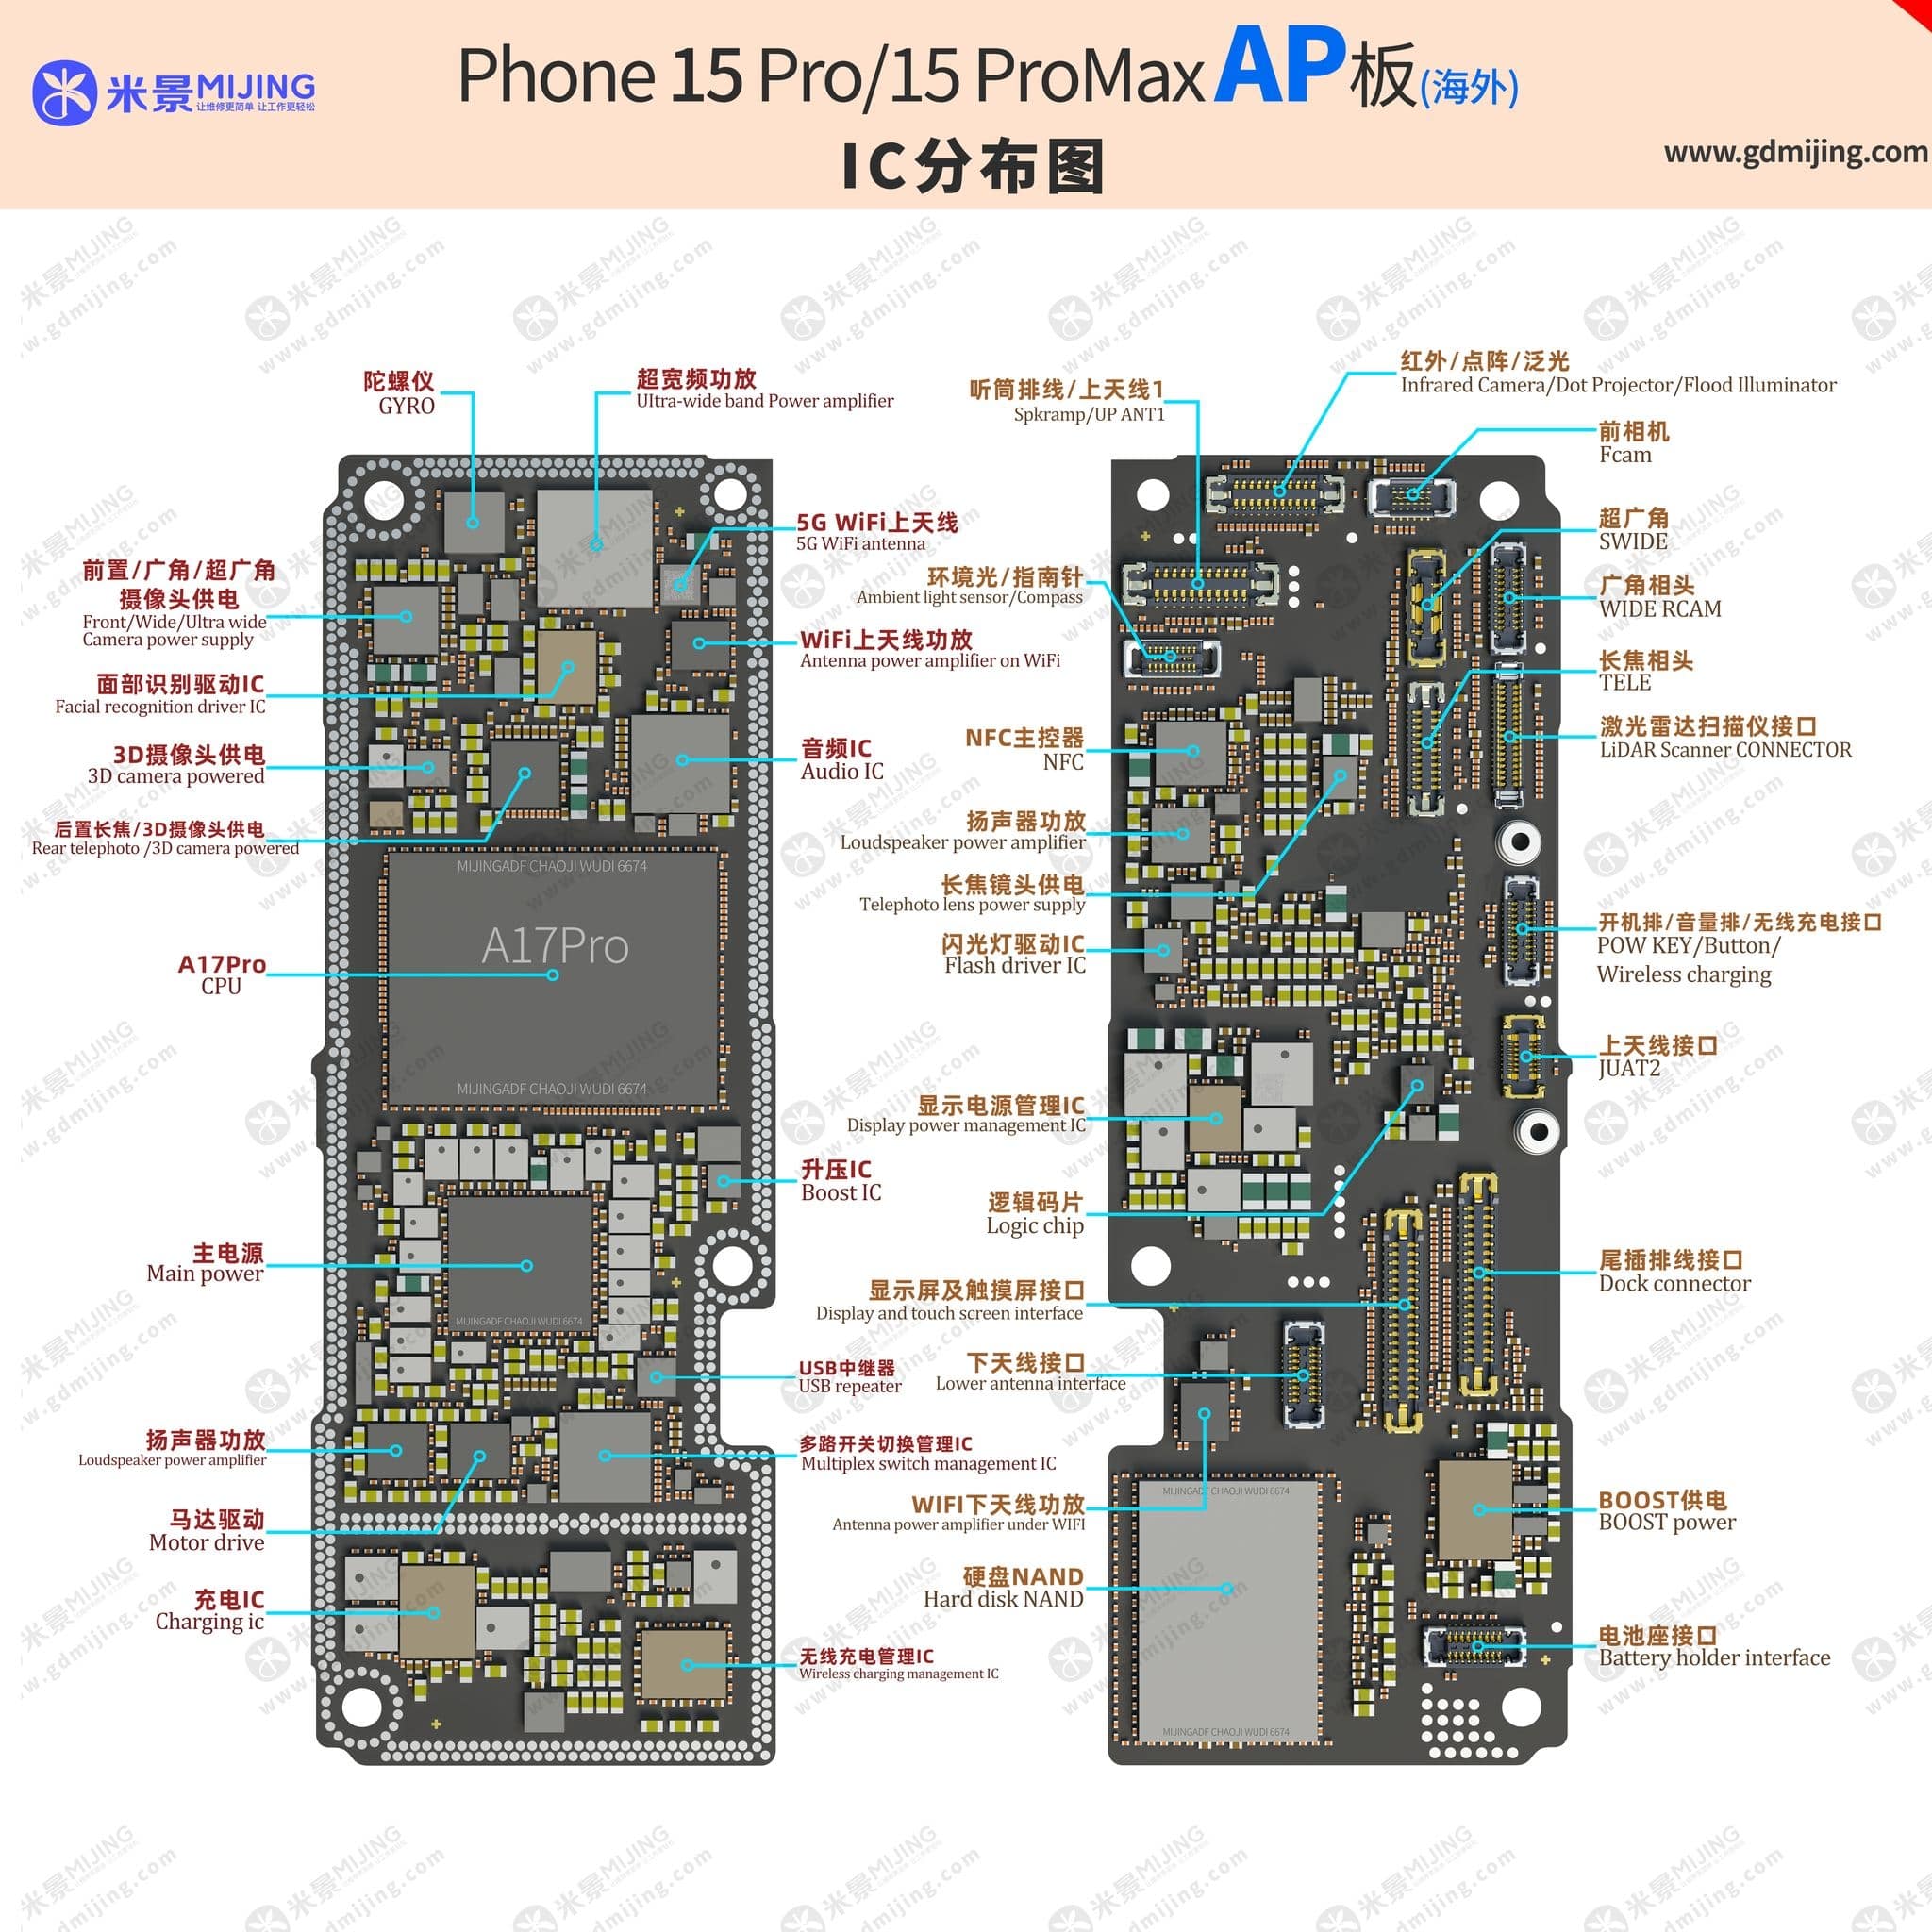 Board View Map of iPhone 15 Series